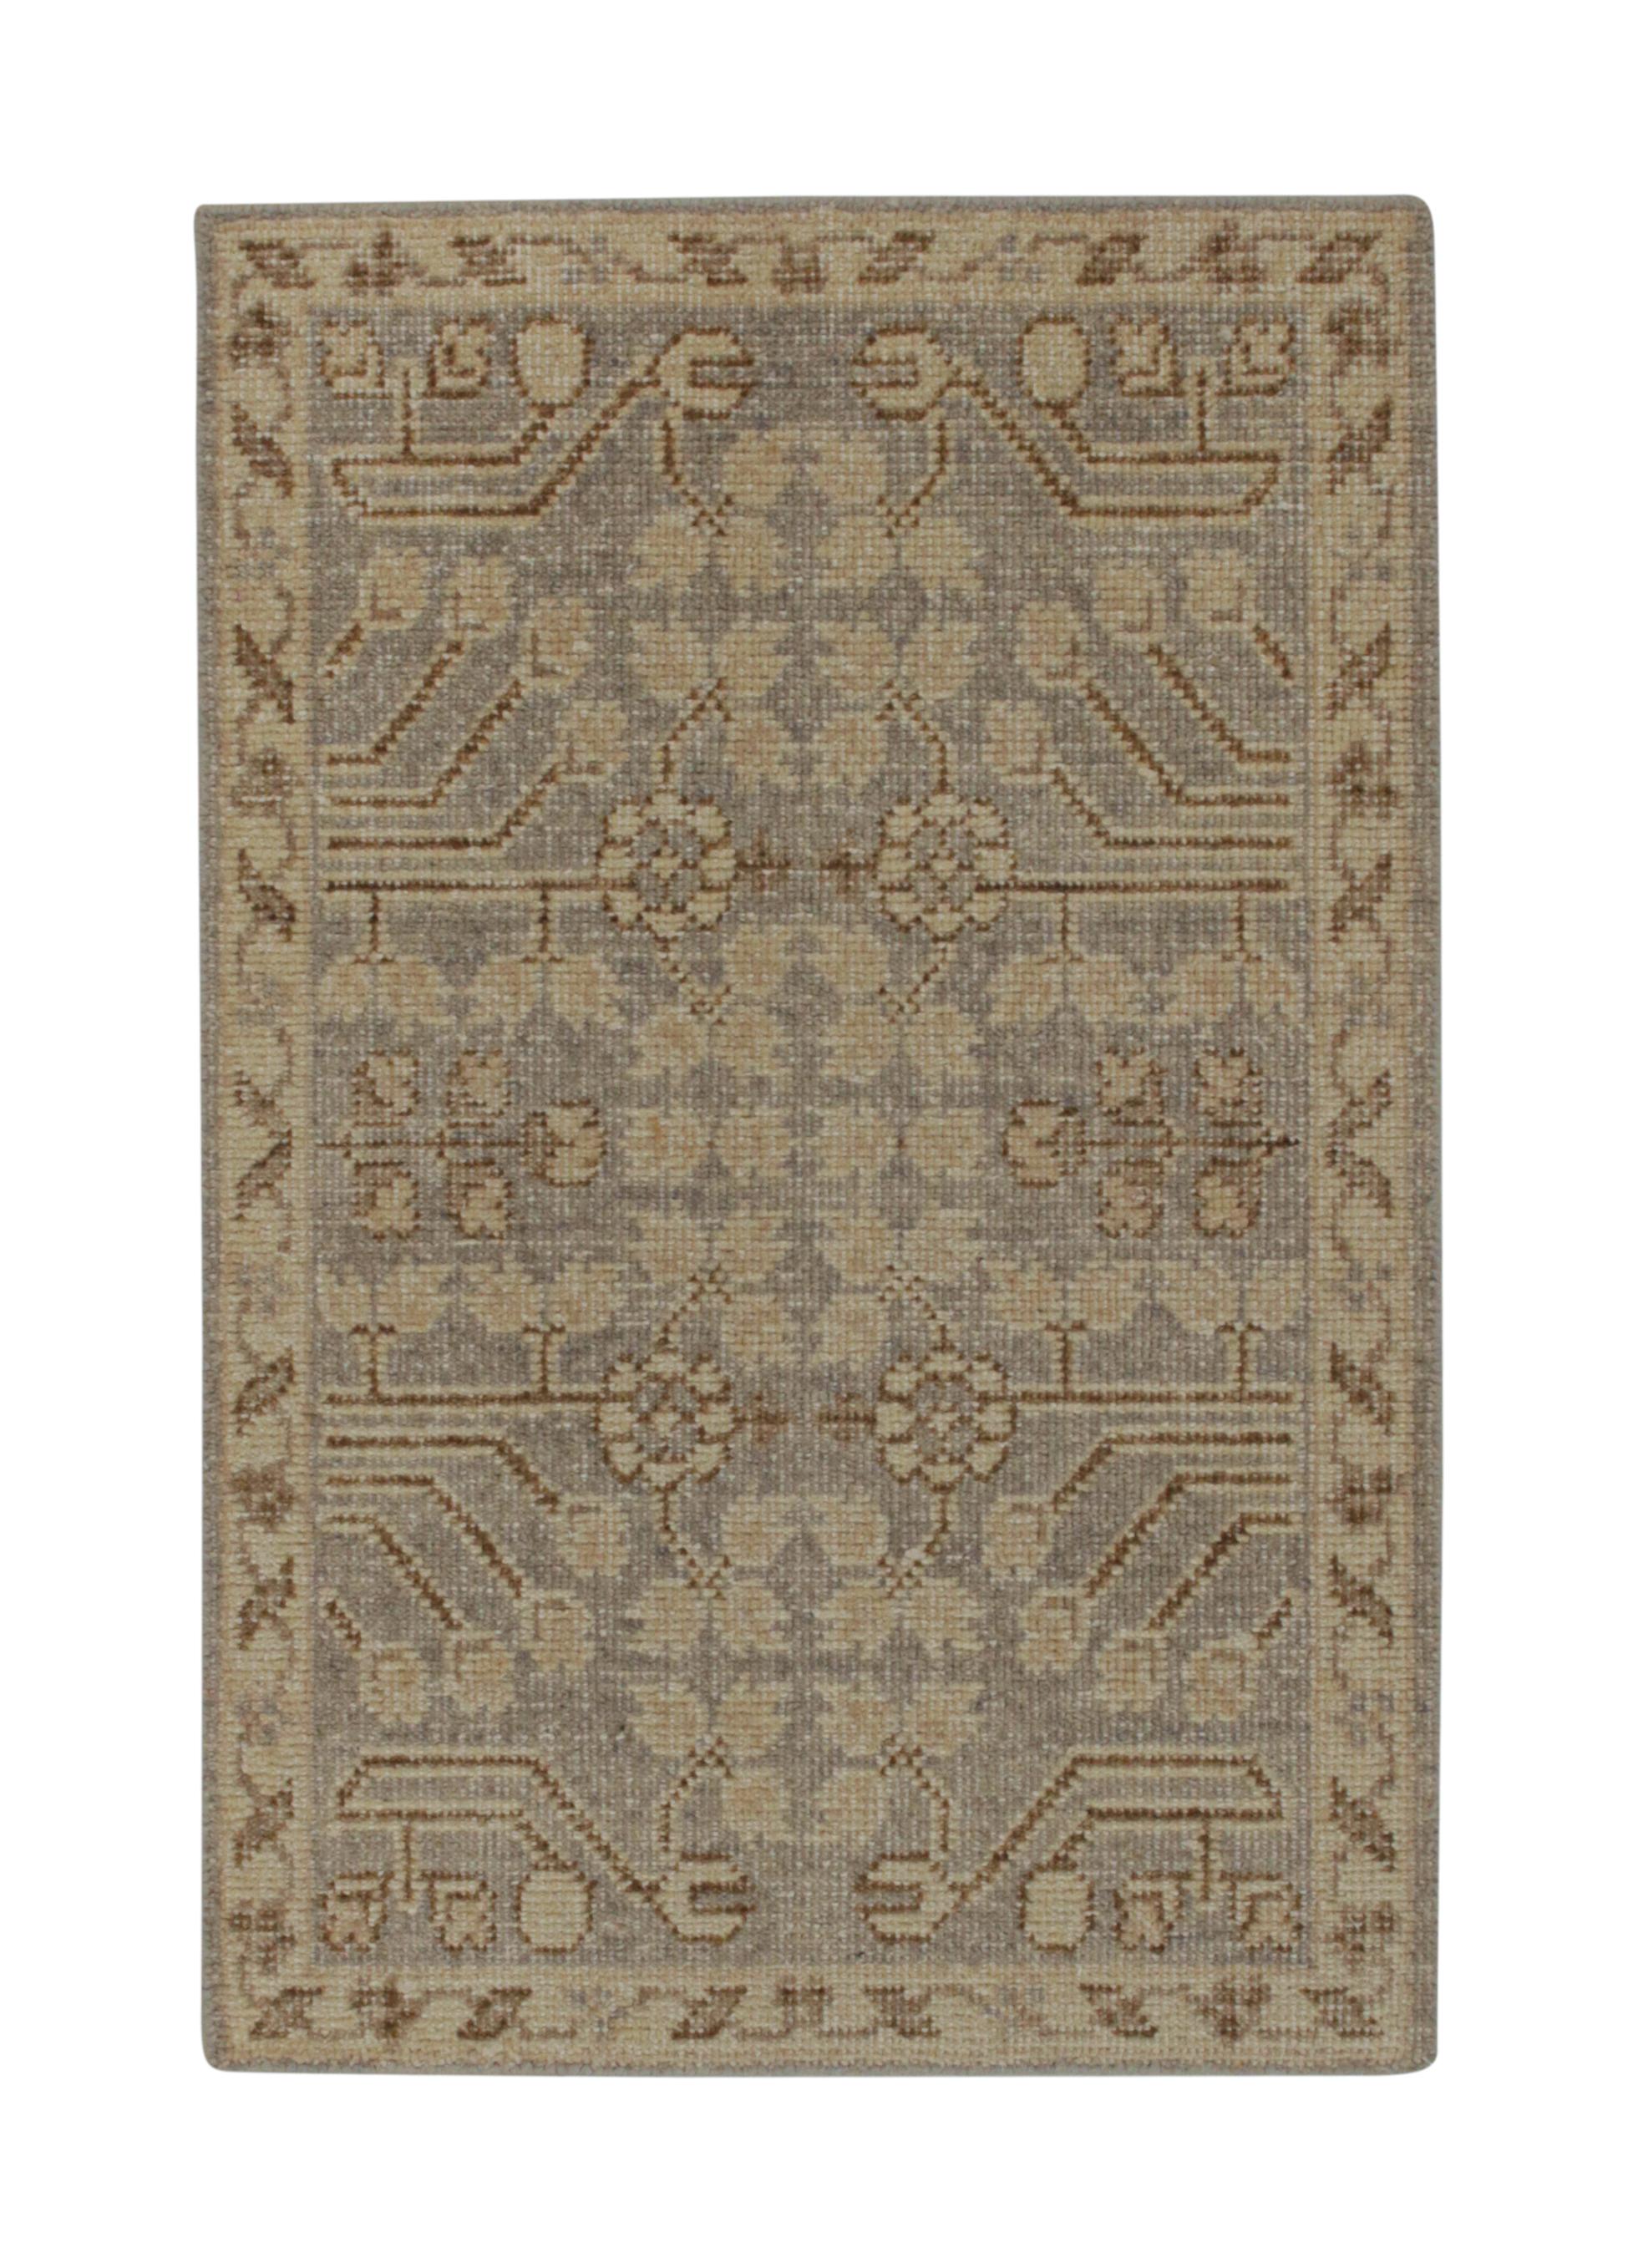 Hand-knotted in wool, a distressed style rug from the gift-sized additions to Rug & Kilim’s Homage Collection. 

The design draws on antique Khotan rug aesthetics in rustic beige-brown and gray, sitting naturally in the distressed texture.